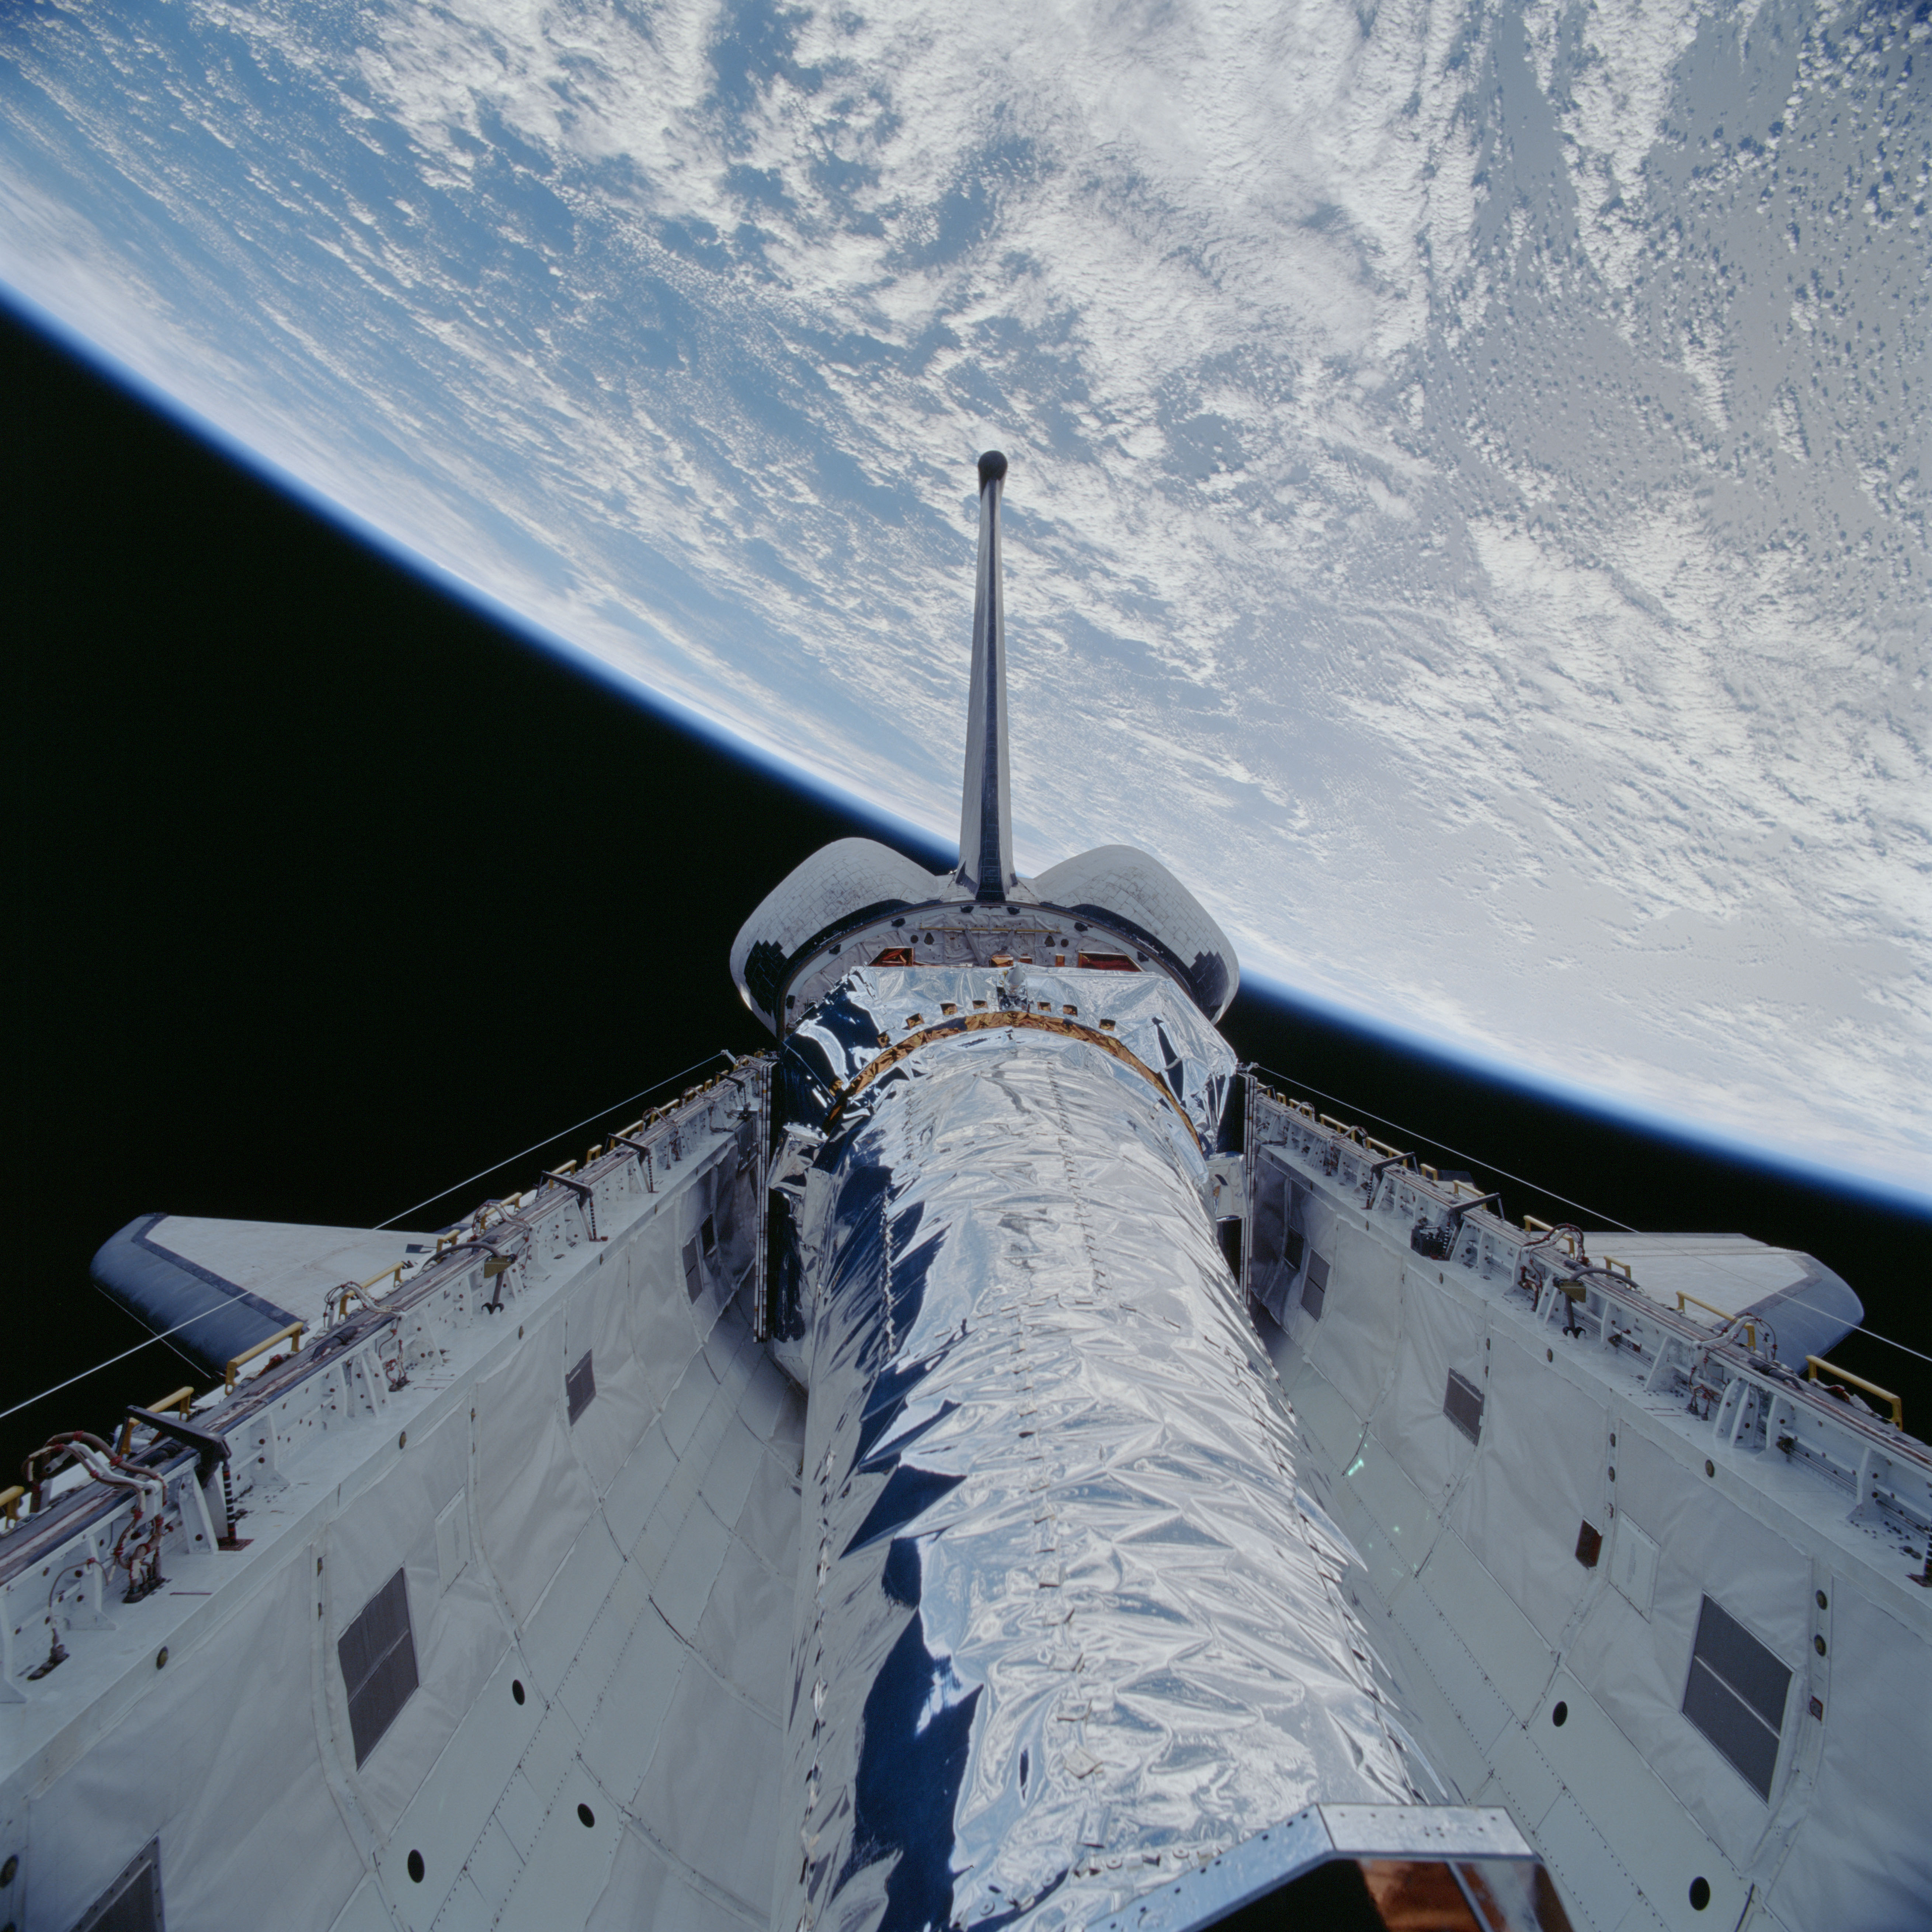 The Chandra X-ray Observatory in Columbia's payload bay shortly after reaching orbit